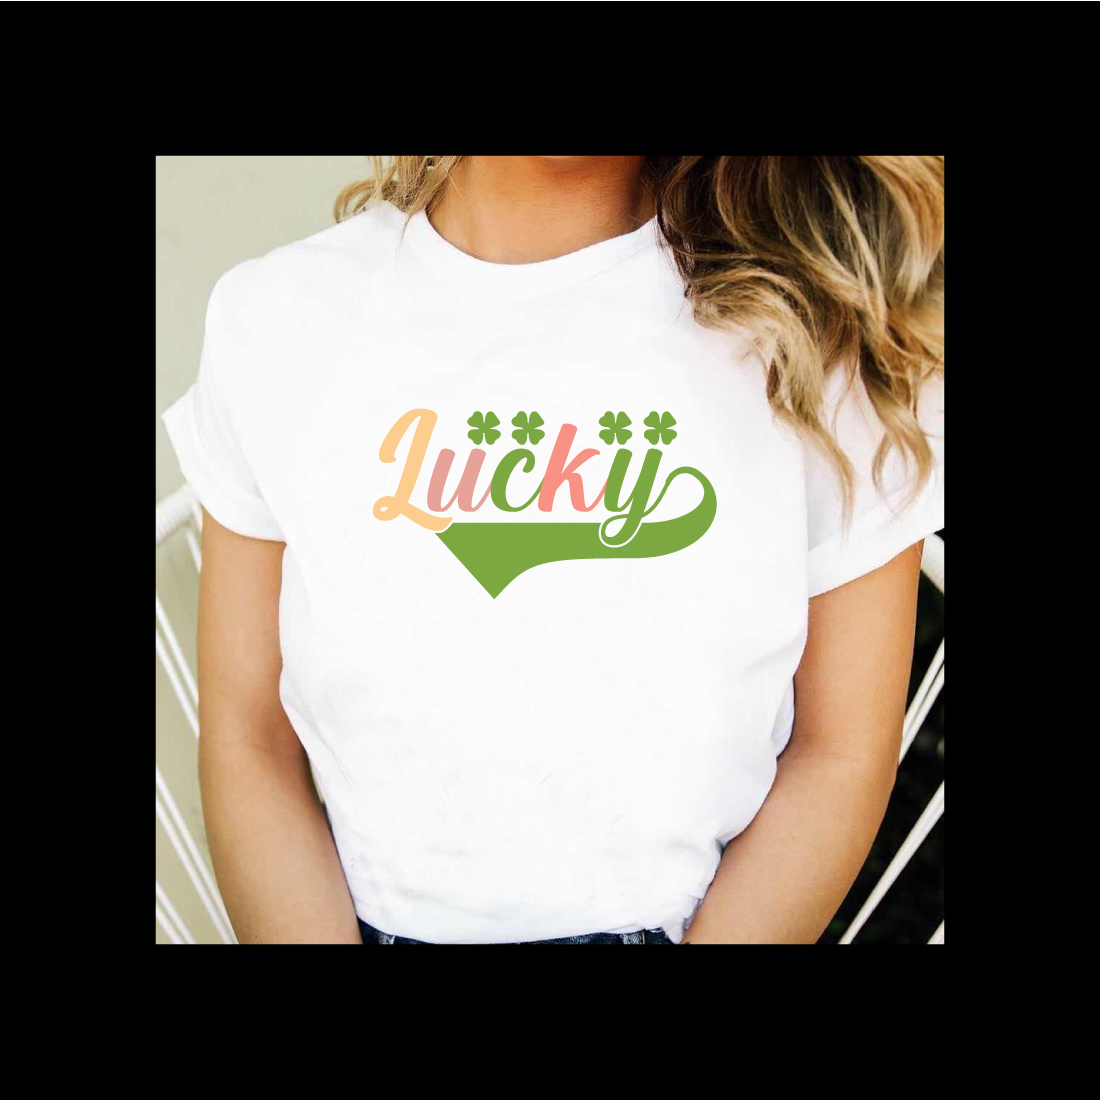 Woman wearing a white shirt with the word lucky on it.